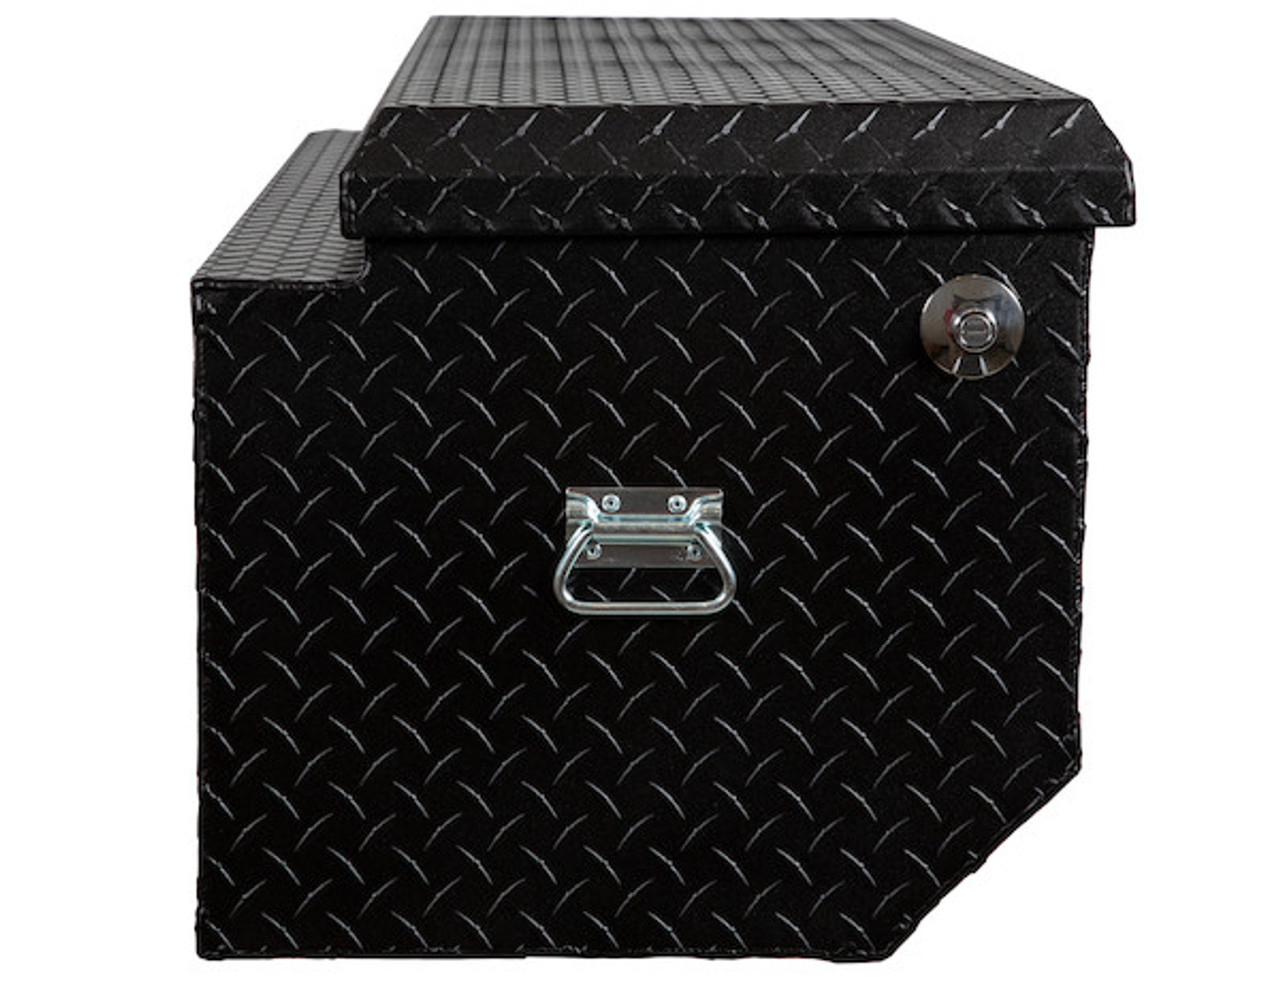 1722010 - 19x20/16x47 Inch Textured Matte Black Diamond Tread Aluminum All-Purpose Chest with Angled Base